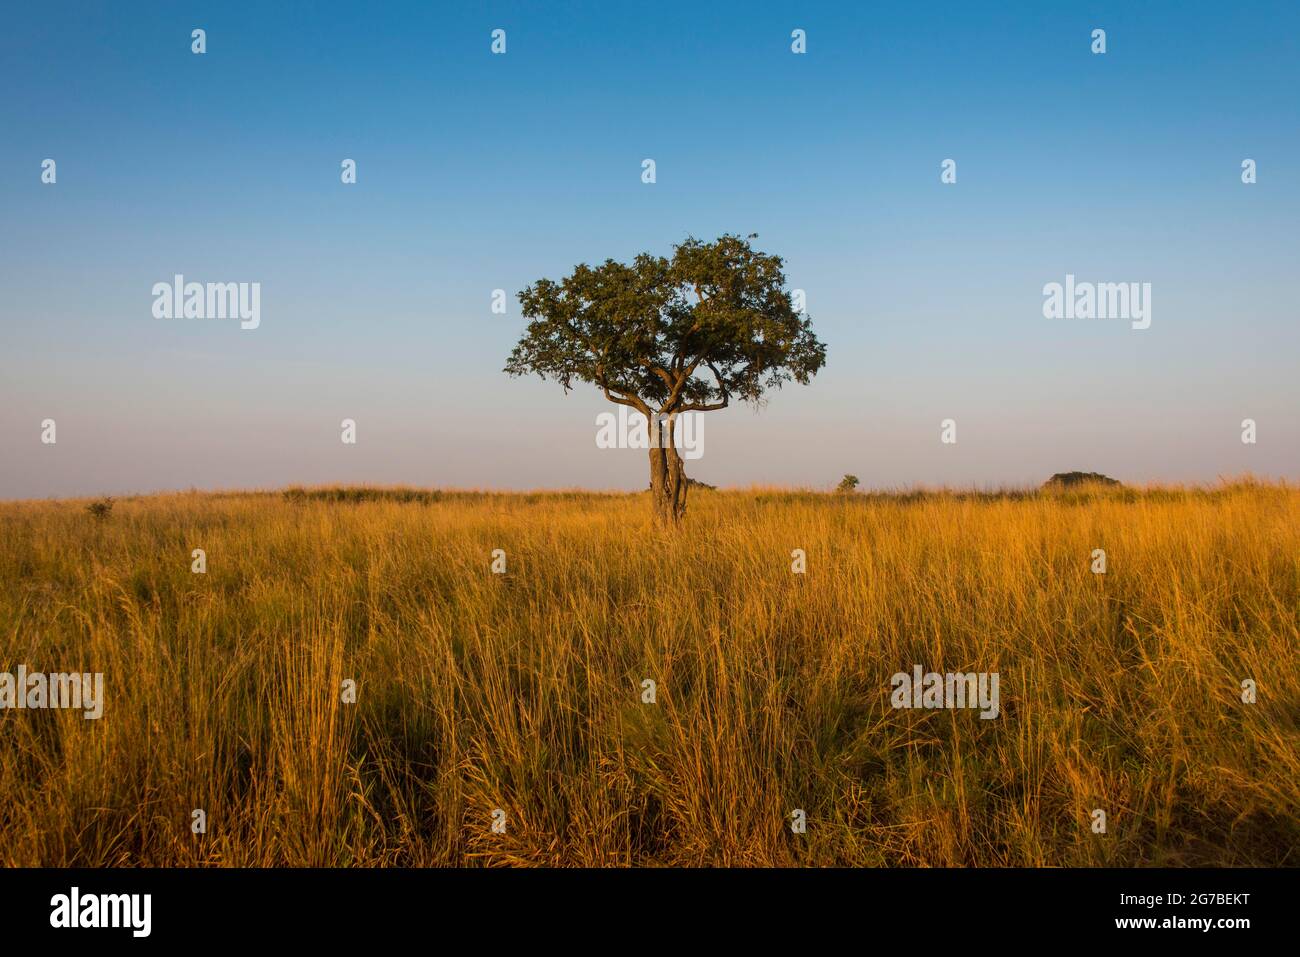 Lonely tree in the Savannah of the Murchison Falls National Park, Uganda, Africa Stock Photo